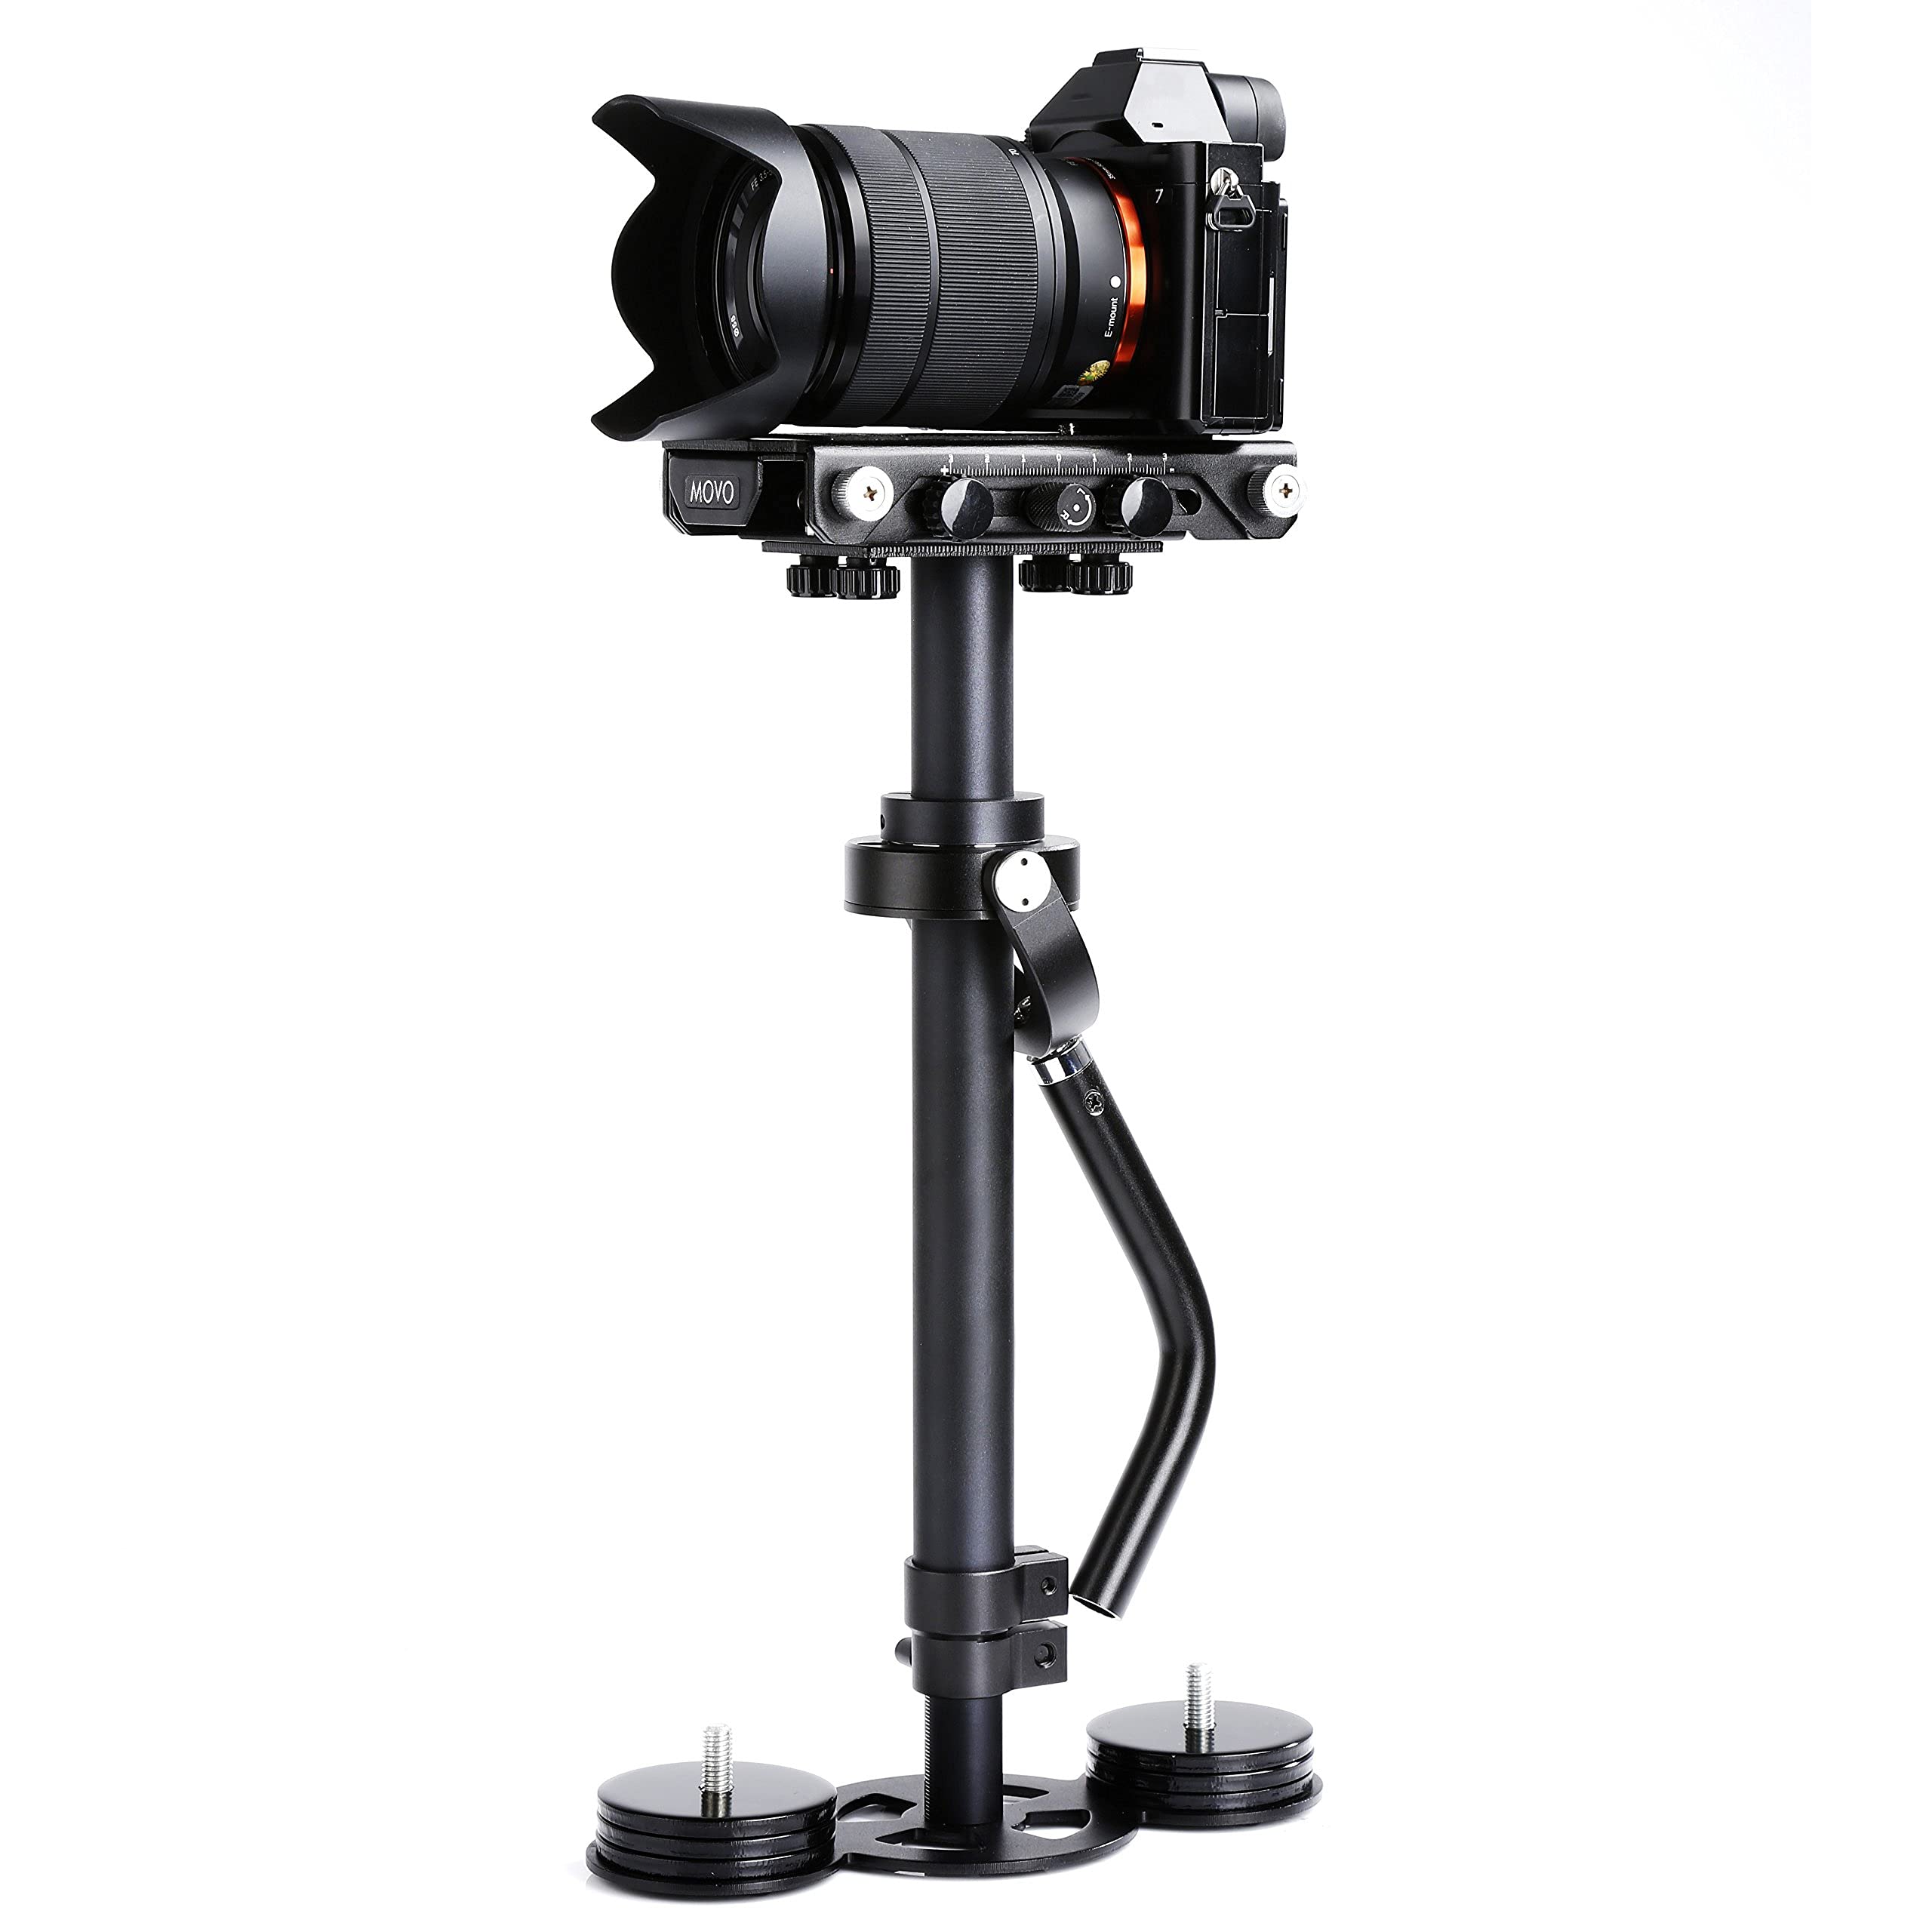 Movo VS3000PRO Telescoping Video Stabilizer System with Micro Balancing and Quick Release Platform - For DSLR Cameras and Camcorders up to 4.4 LBS  - Like New